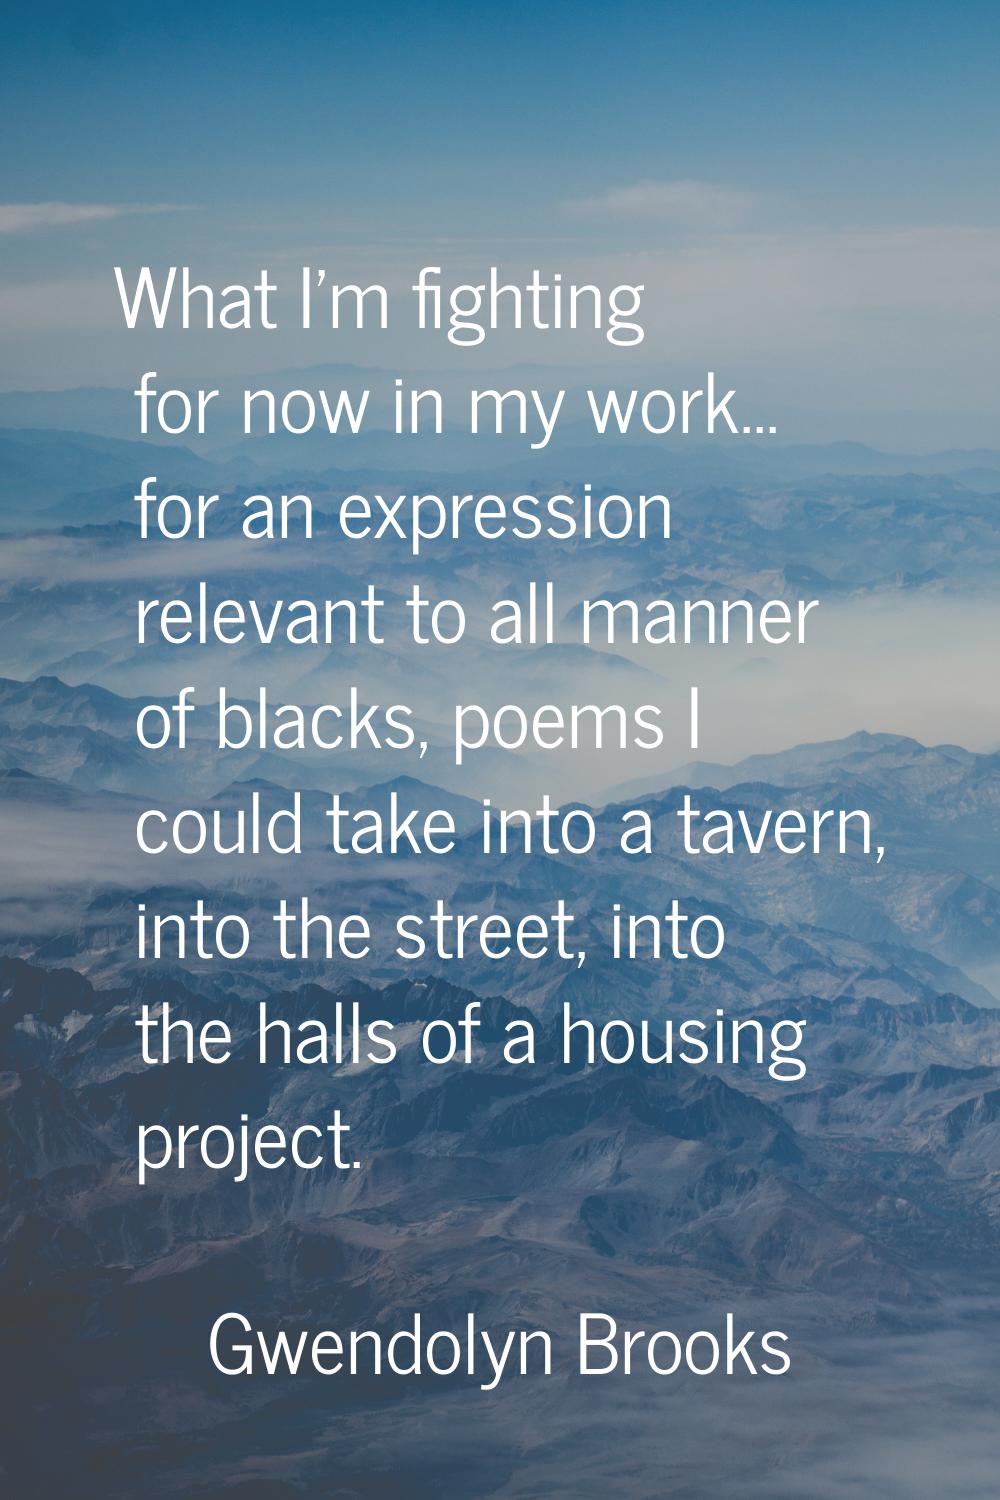 What I'm fighting for now in my work... for an expression relevant to all manner of blacks, poems I